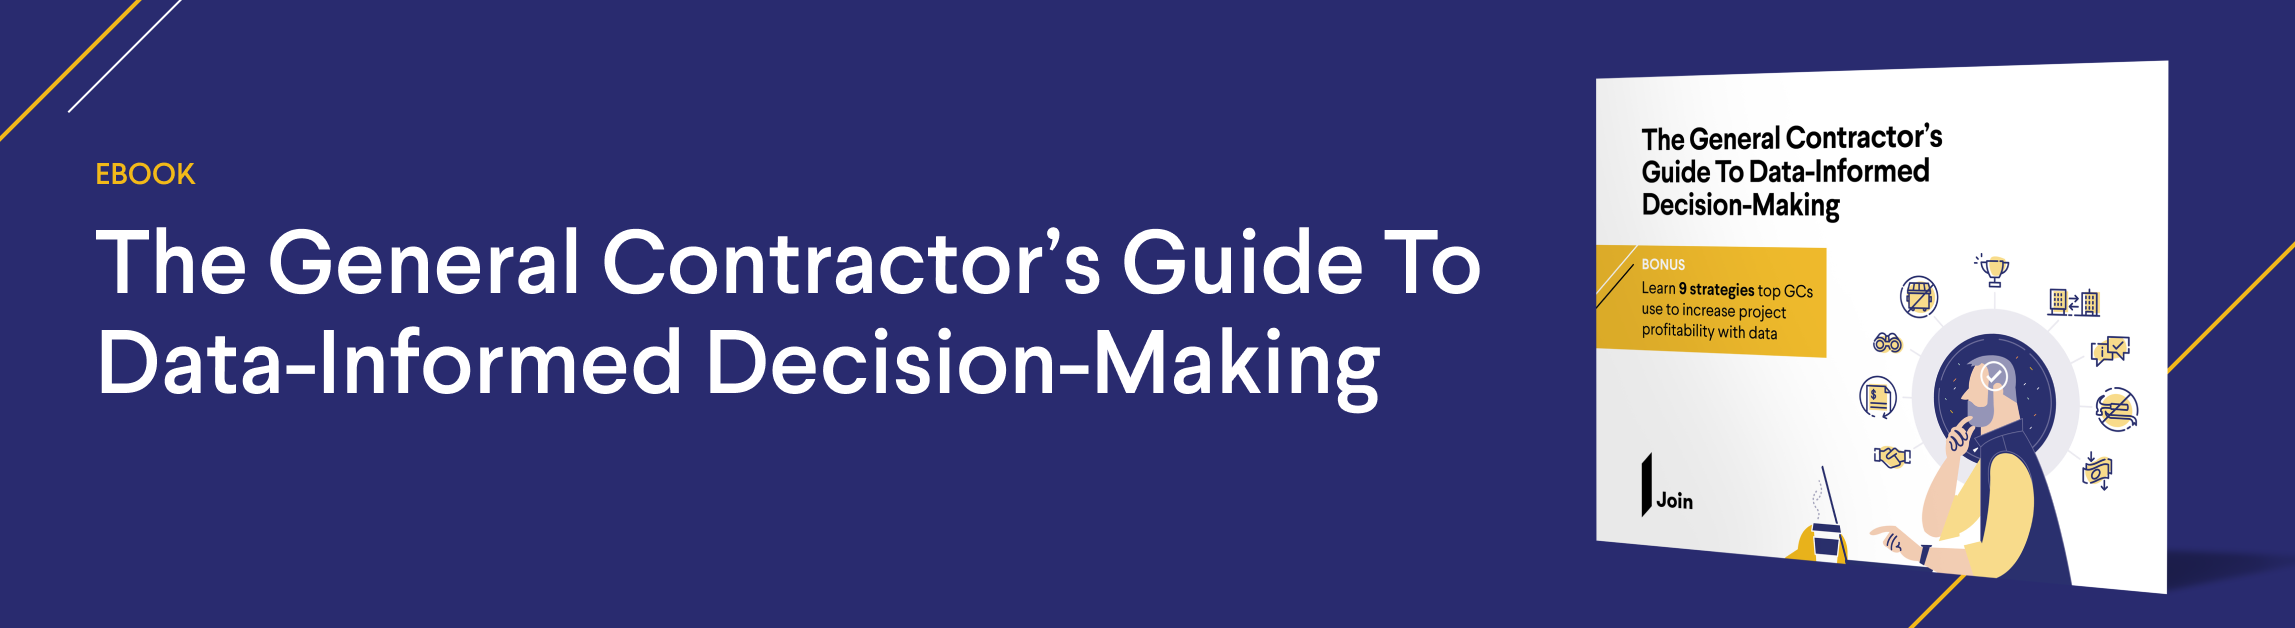 eBook _ The General Contractor’s Guide To Data-Informed Decision-Making - Landing Page Banner-1